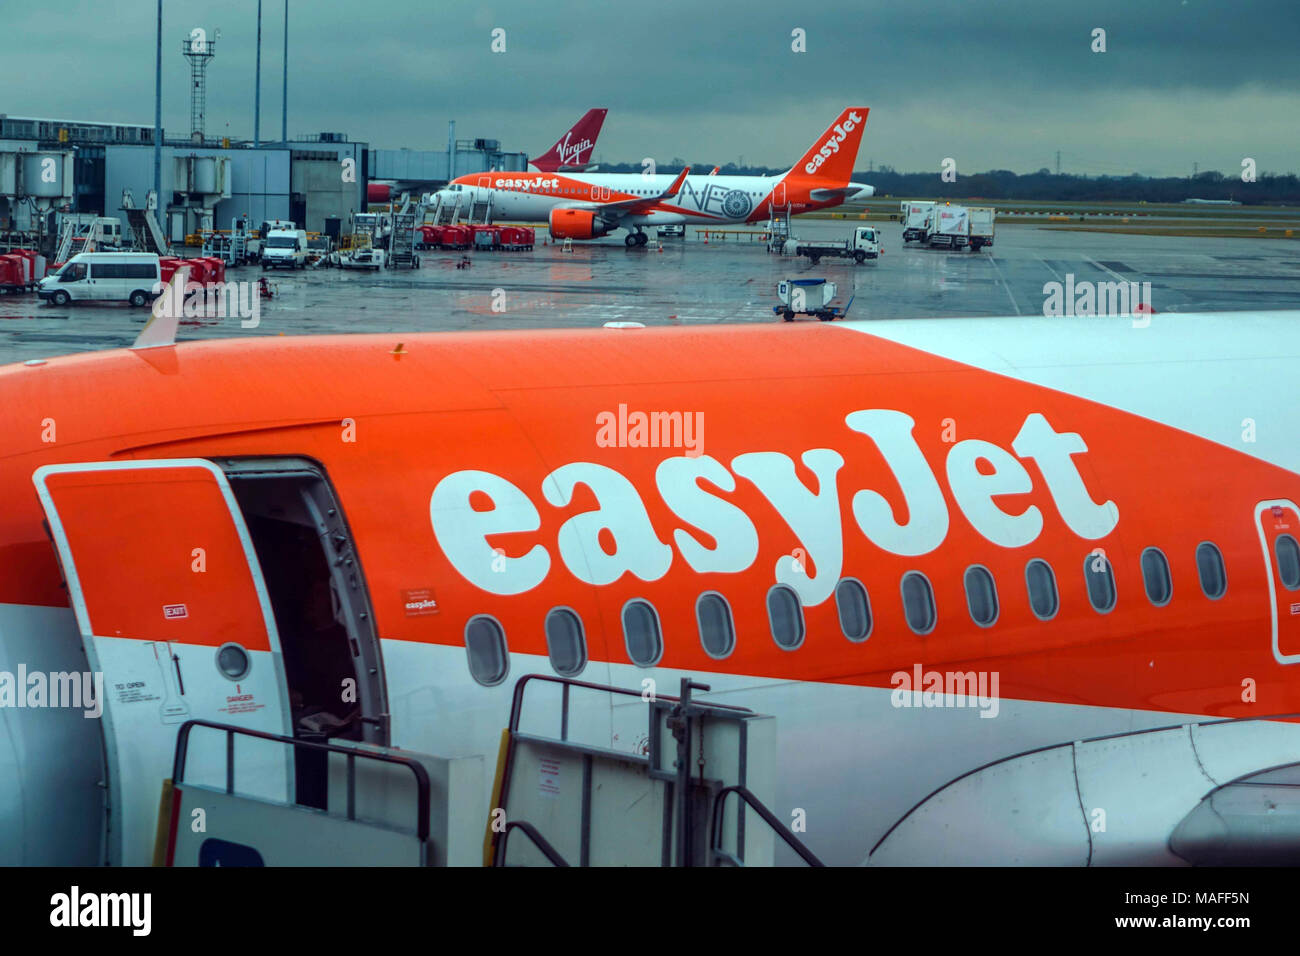 EasyJet Boeing 737 boarding at Manchester airport on rainy day Stock Photo